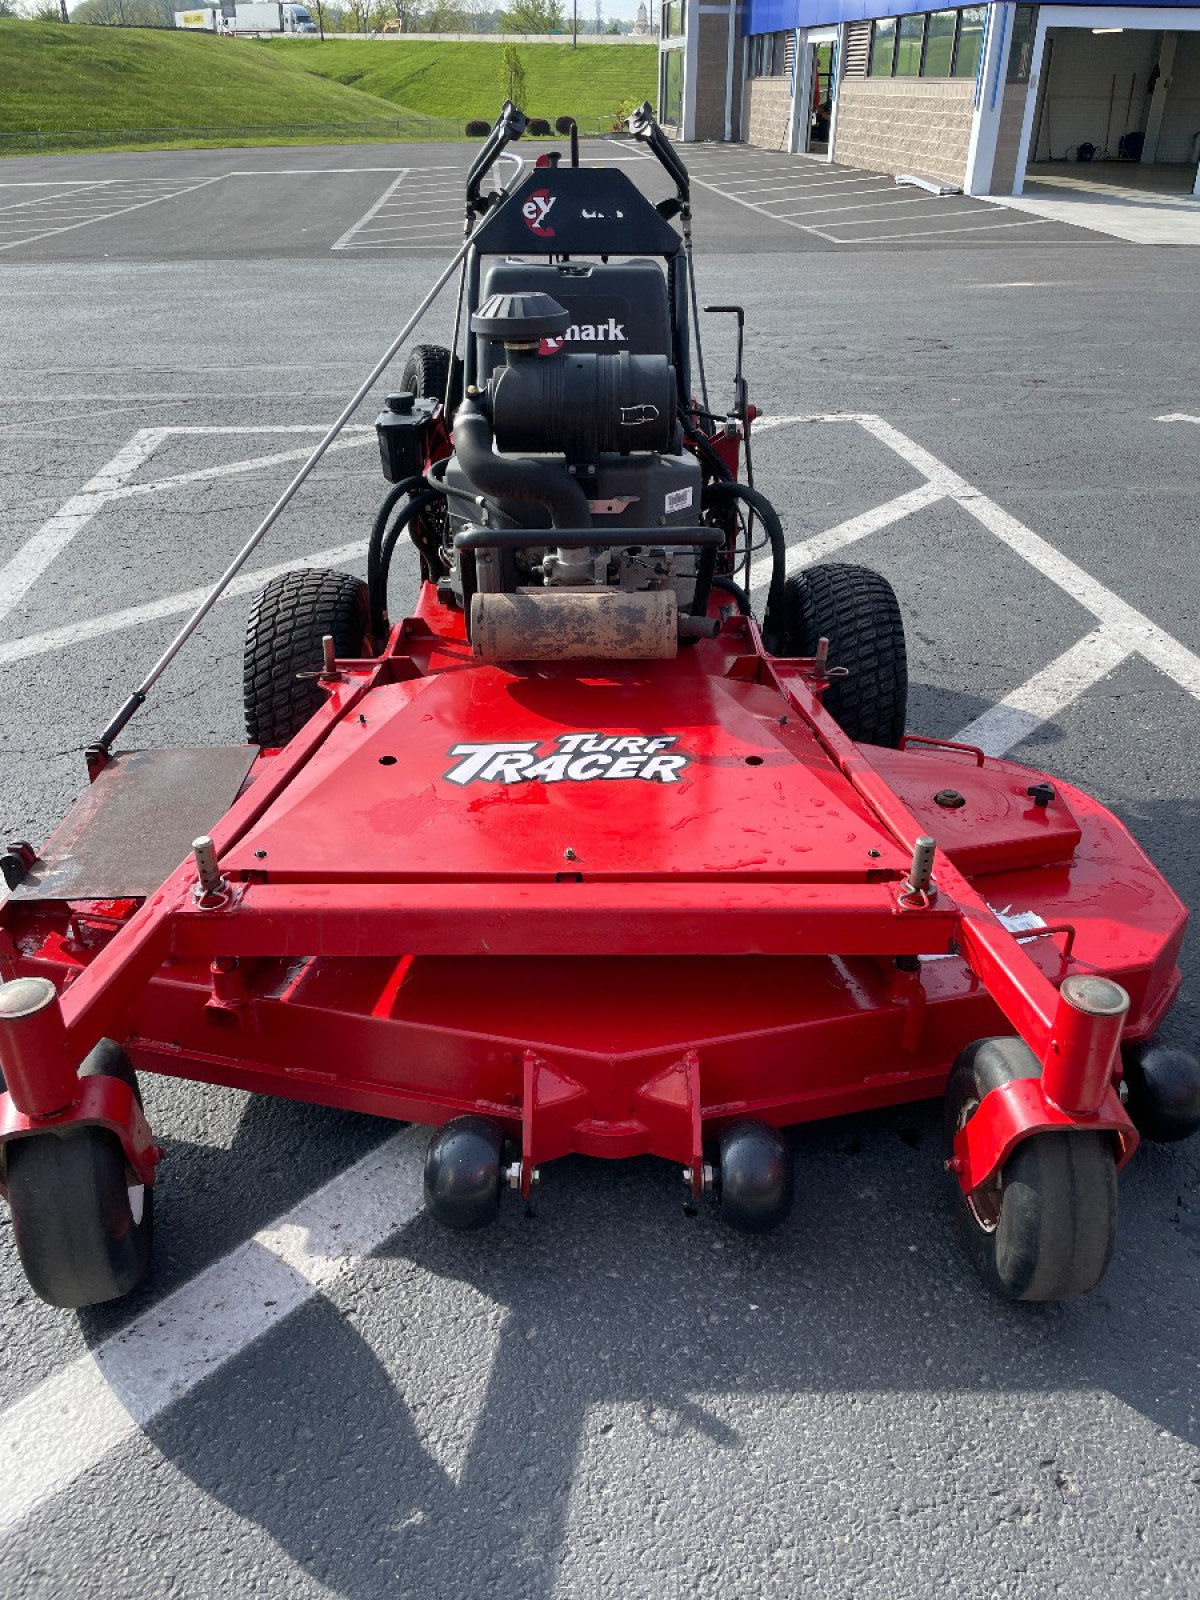 American Pride Power Equipment - Used Pre-Owned Exmark Turf Tracer 60